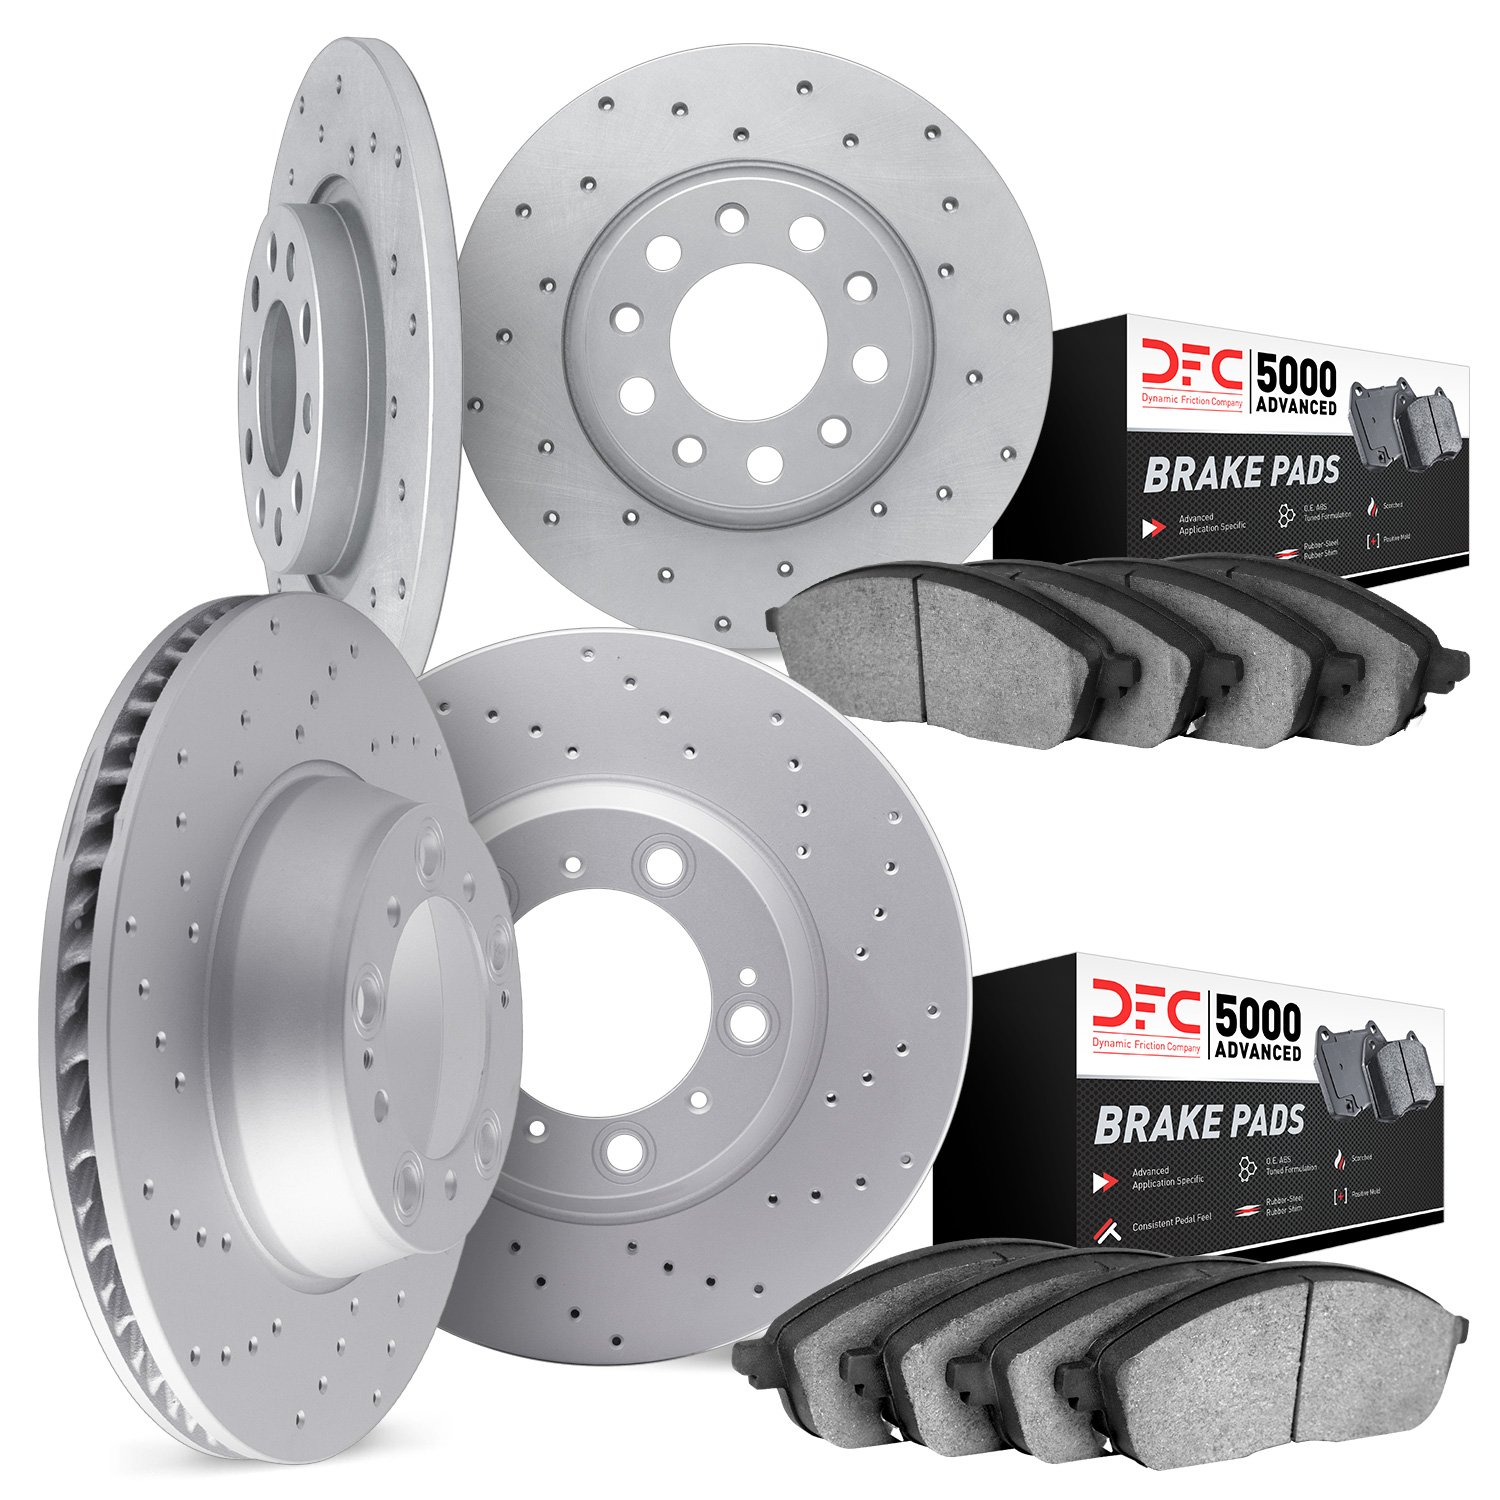 2704-31114 Geoperformance Drilled Brake Rotors with Active Performance Pads Kit, 2000-2006 BMW, Position: Front and Rear